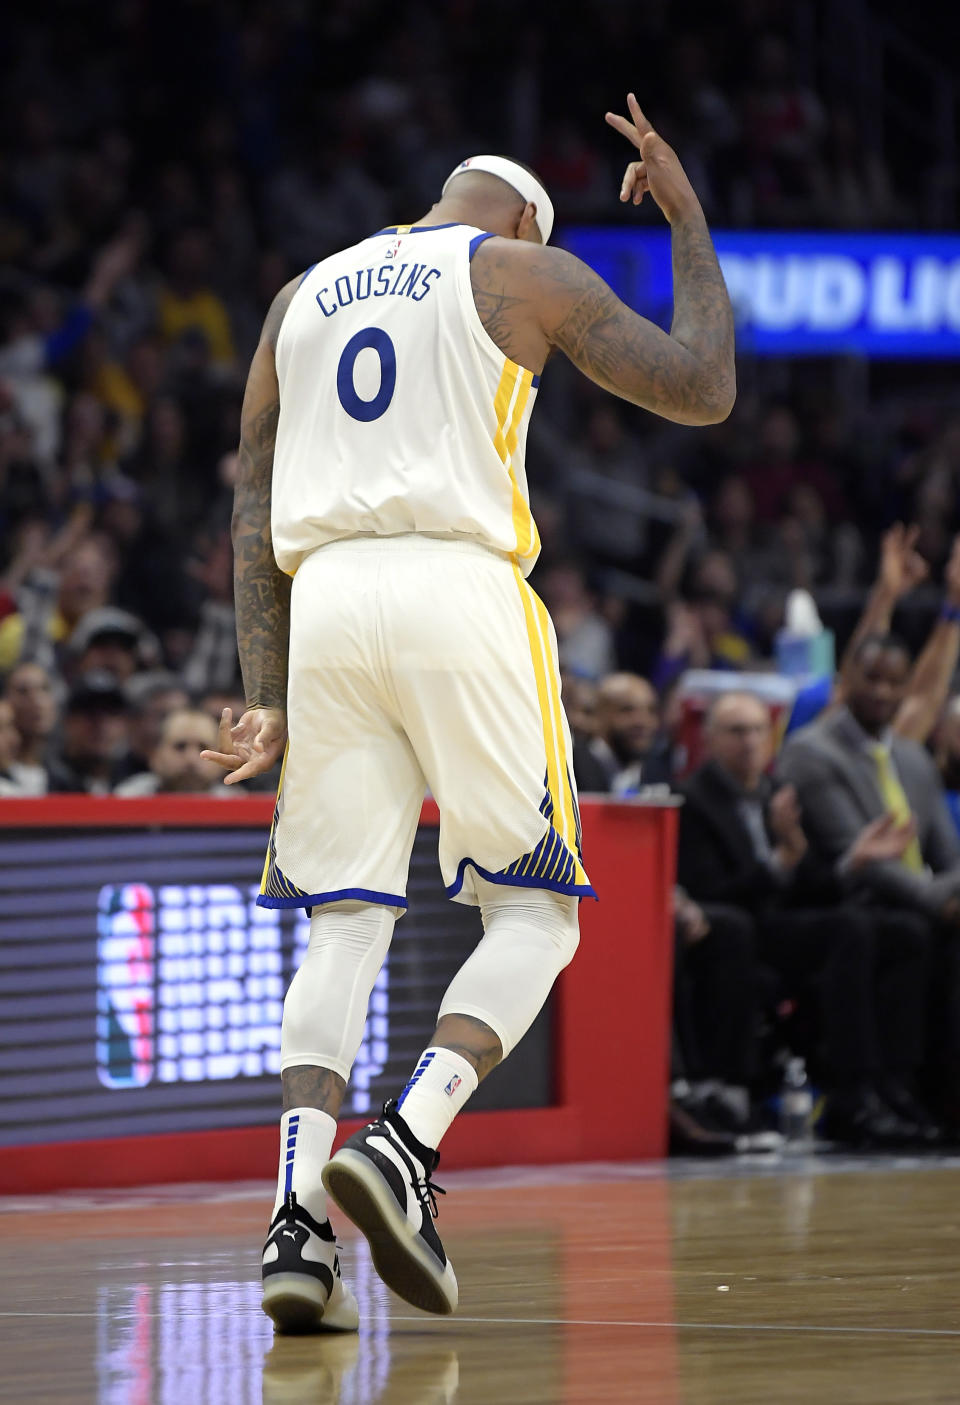 Golden State Warriors center DeMarcus Cousins gestures after scoring during the second half of the team's NBA basketball game against the Los Angeles Clippers on Friday, Jan. 18, 2019, in Los Angeles. The Warriors won 112-94. (AP Photo/Mark J. Terrill)